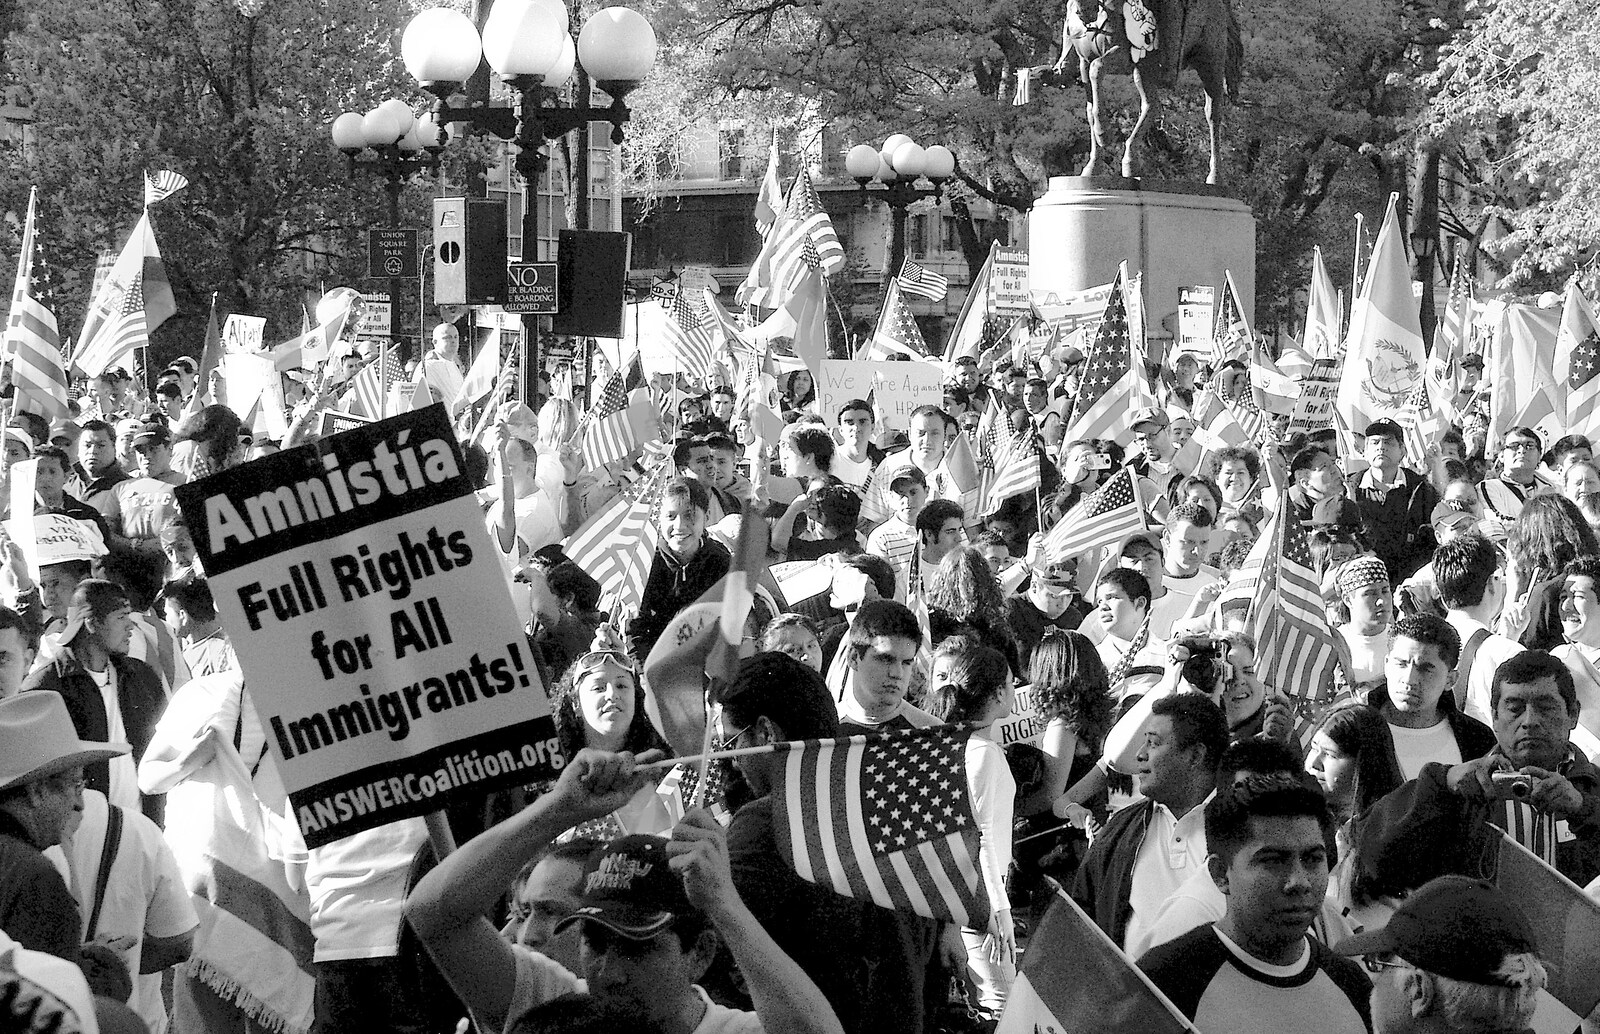 Massed flag waving from A Union Square Demo, Bryant Park and Columbus Circle, New York, US - 2nd May 2006